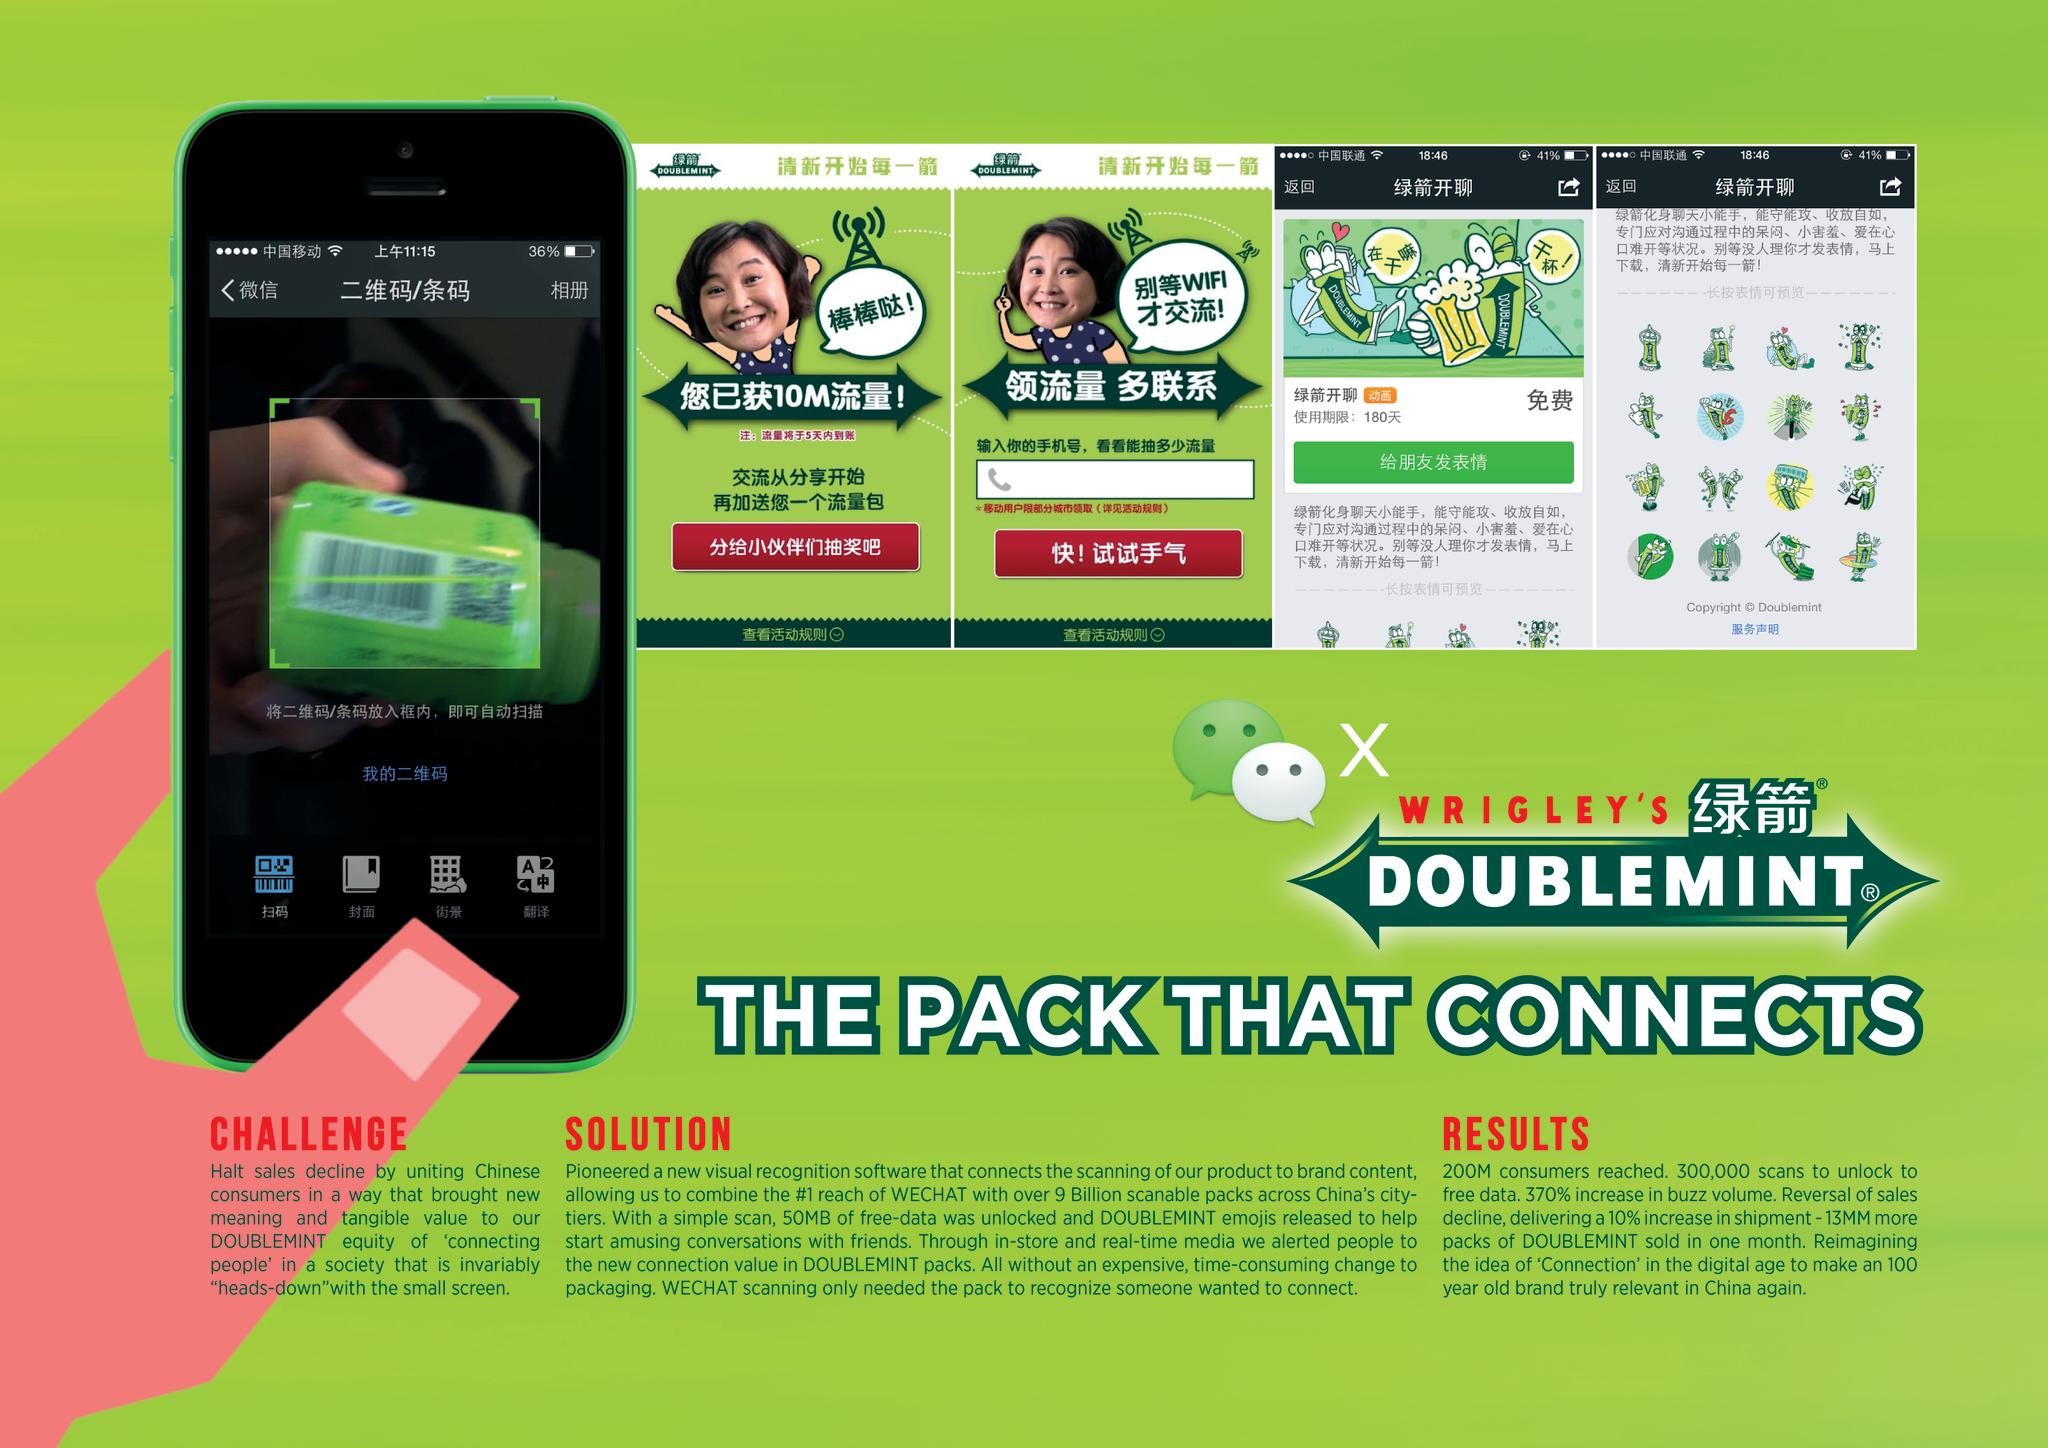 DOUBLEMINT ' THE PACK THAT CONNECTS'